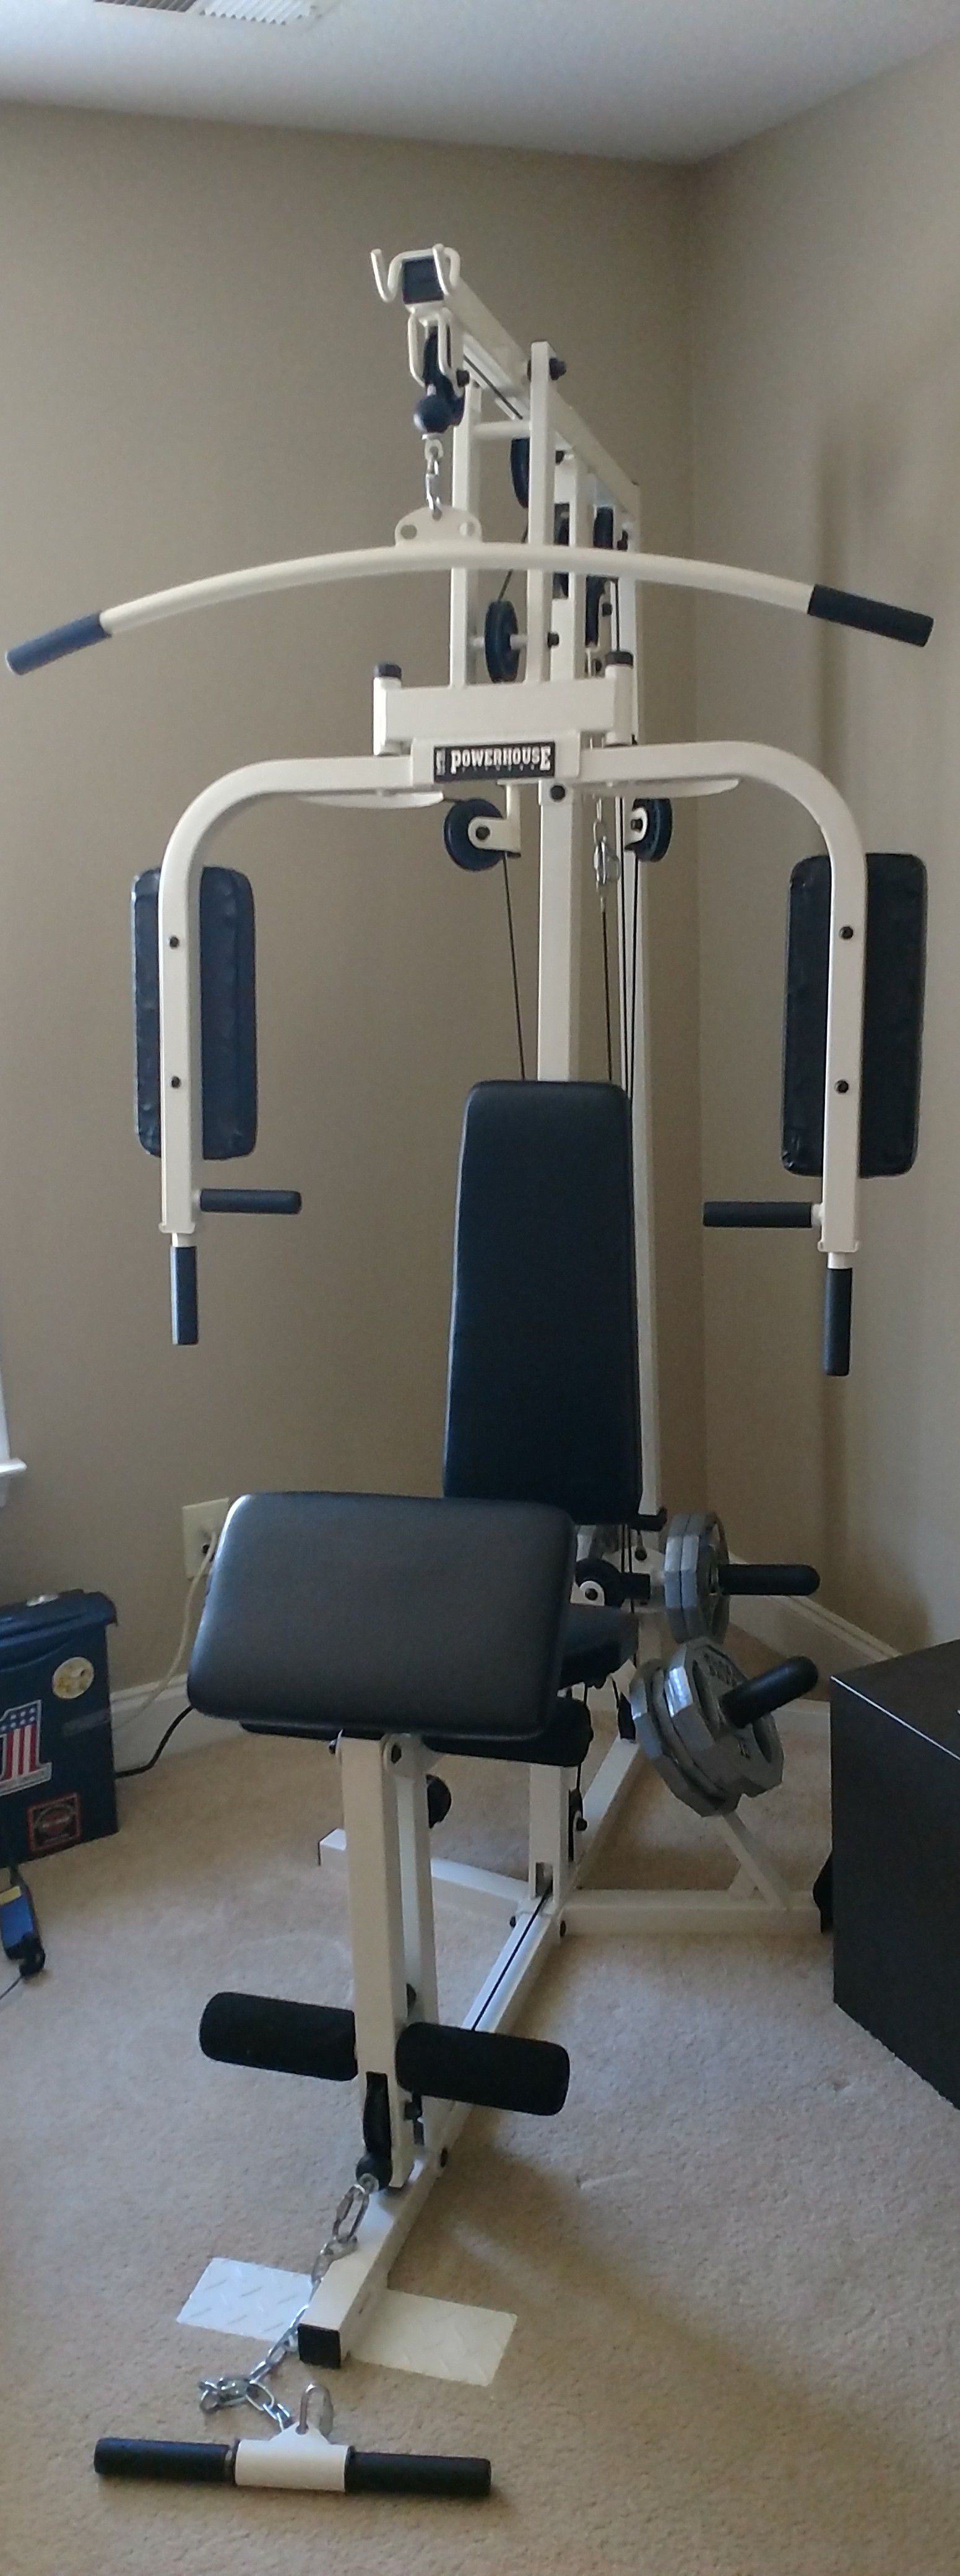 For Sale or Trade- Powerhouse Home Gym